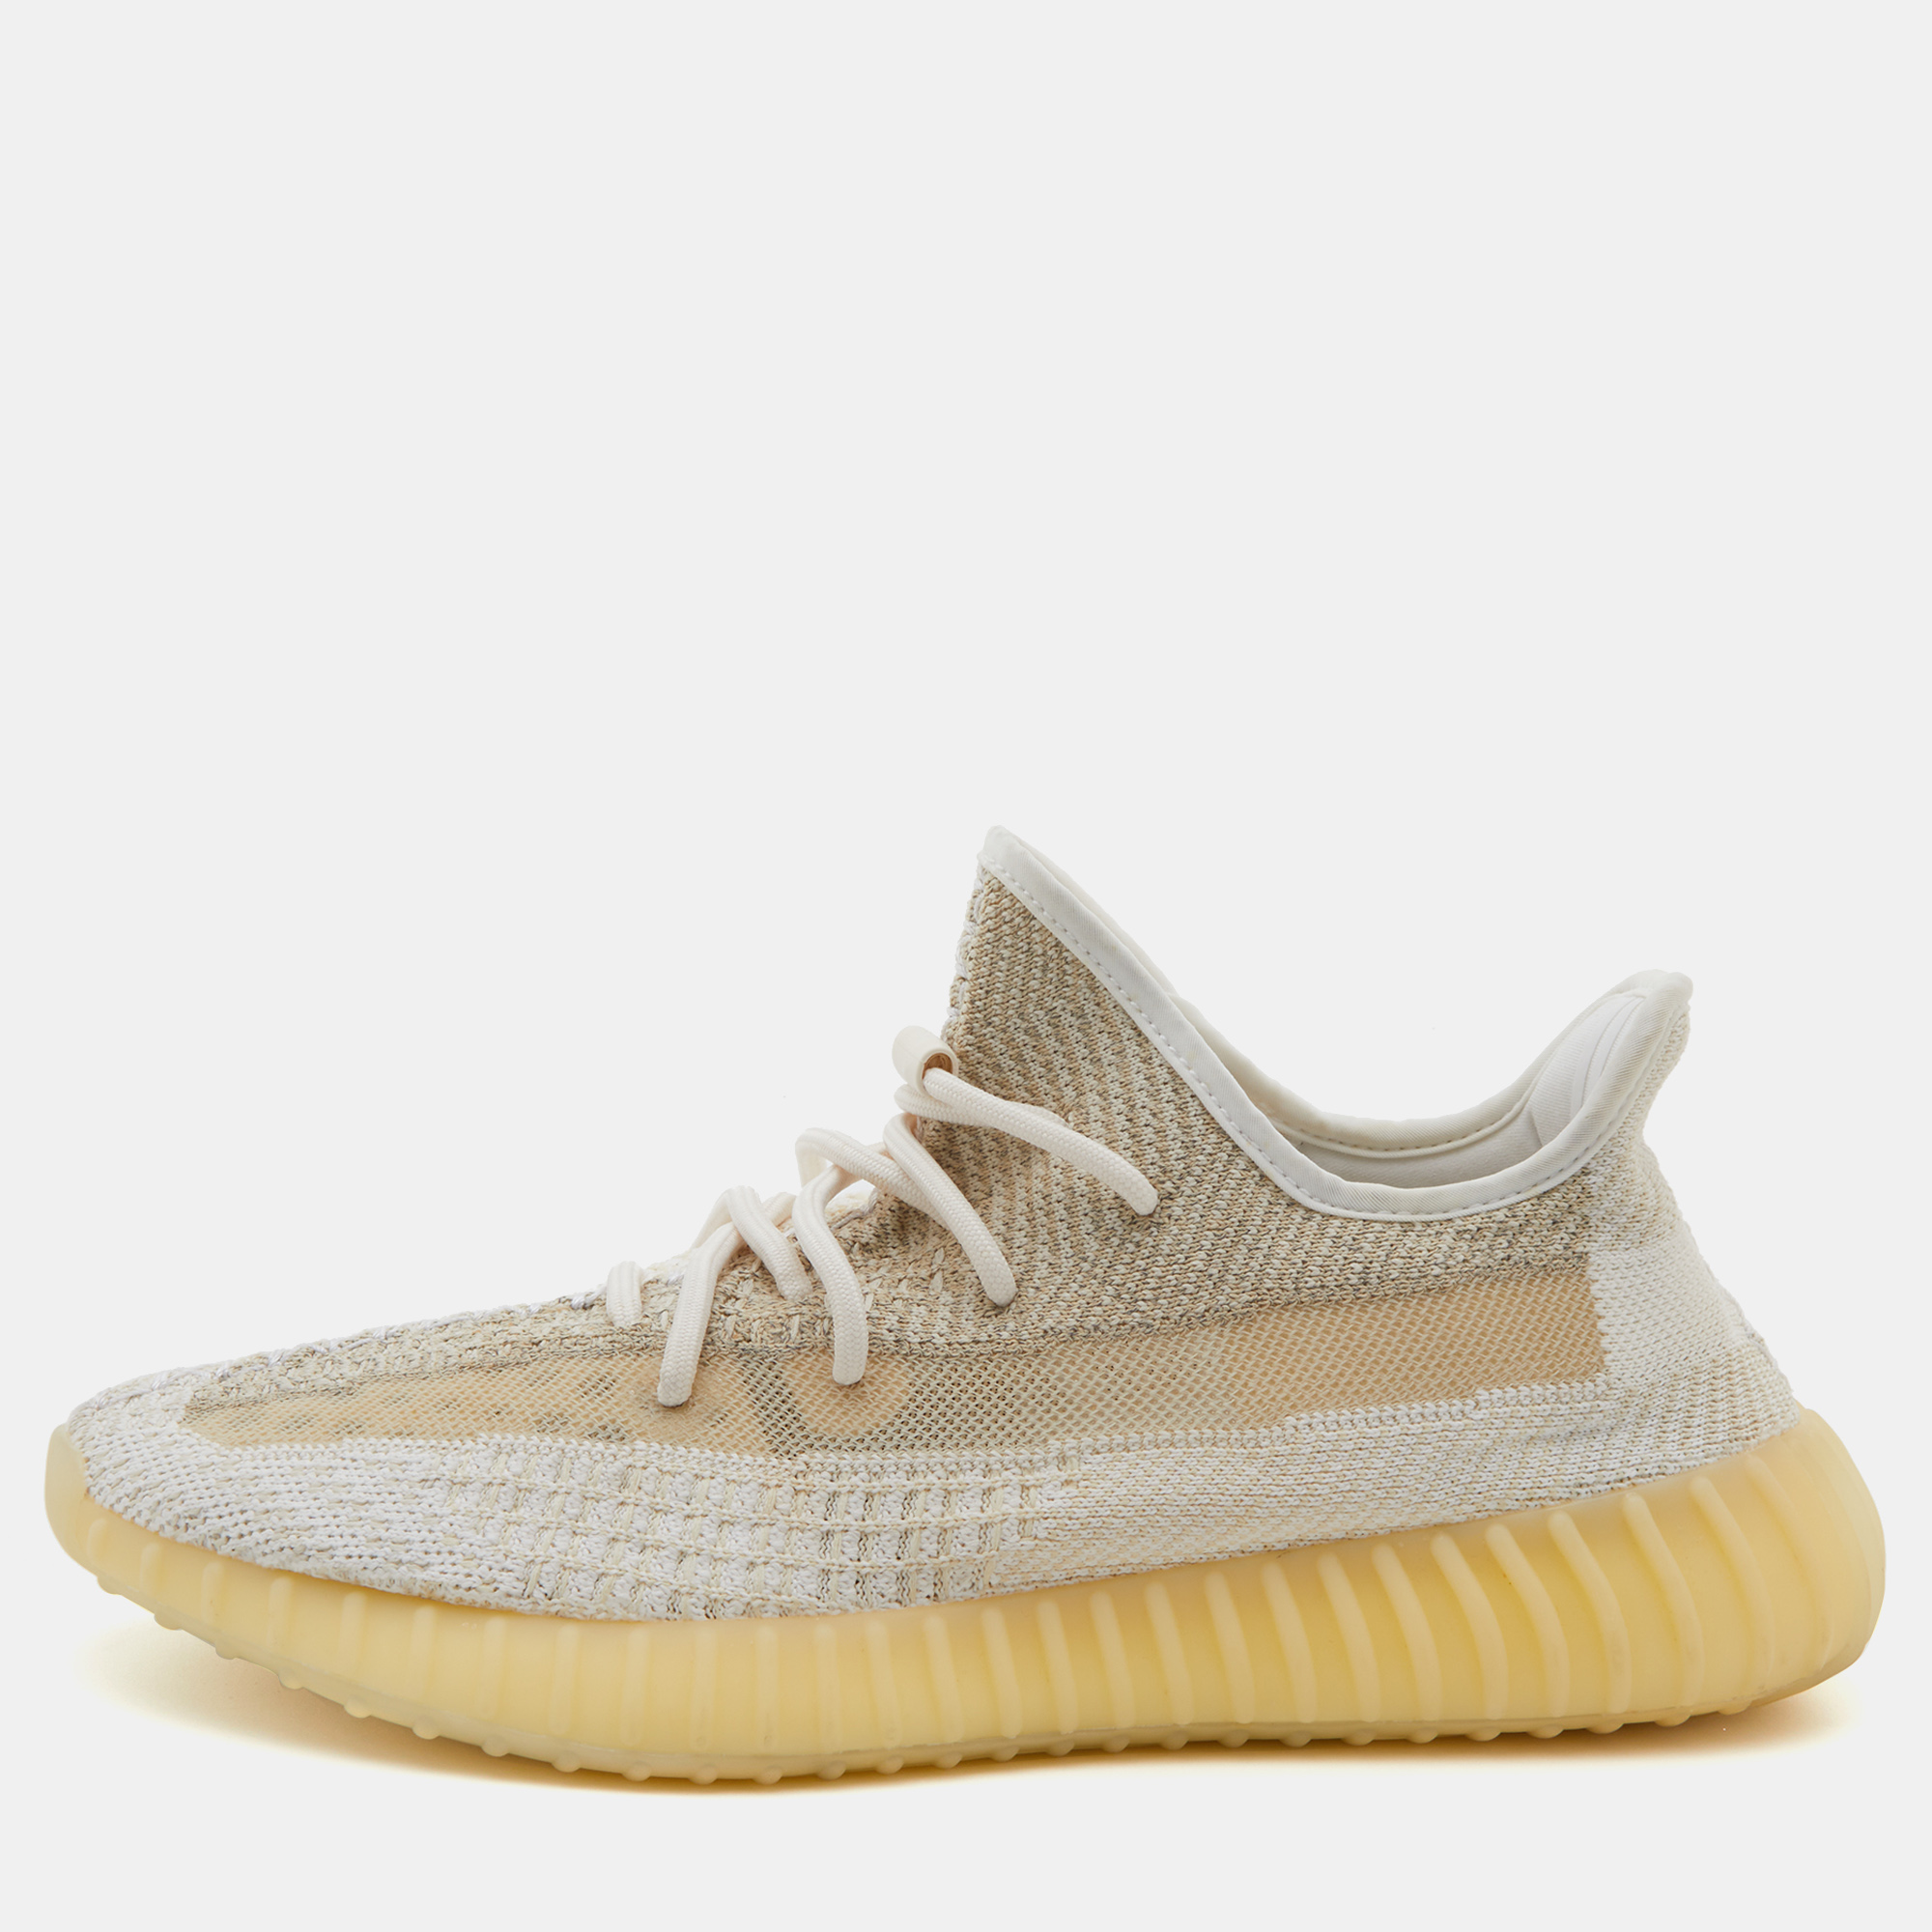 Yeezy x Adidas White Knit Fabric Boost 350 V2 Cream Low Top